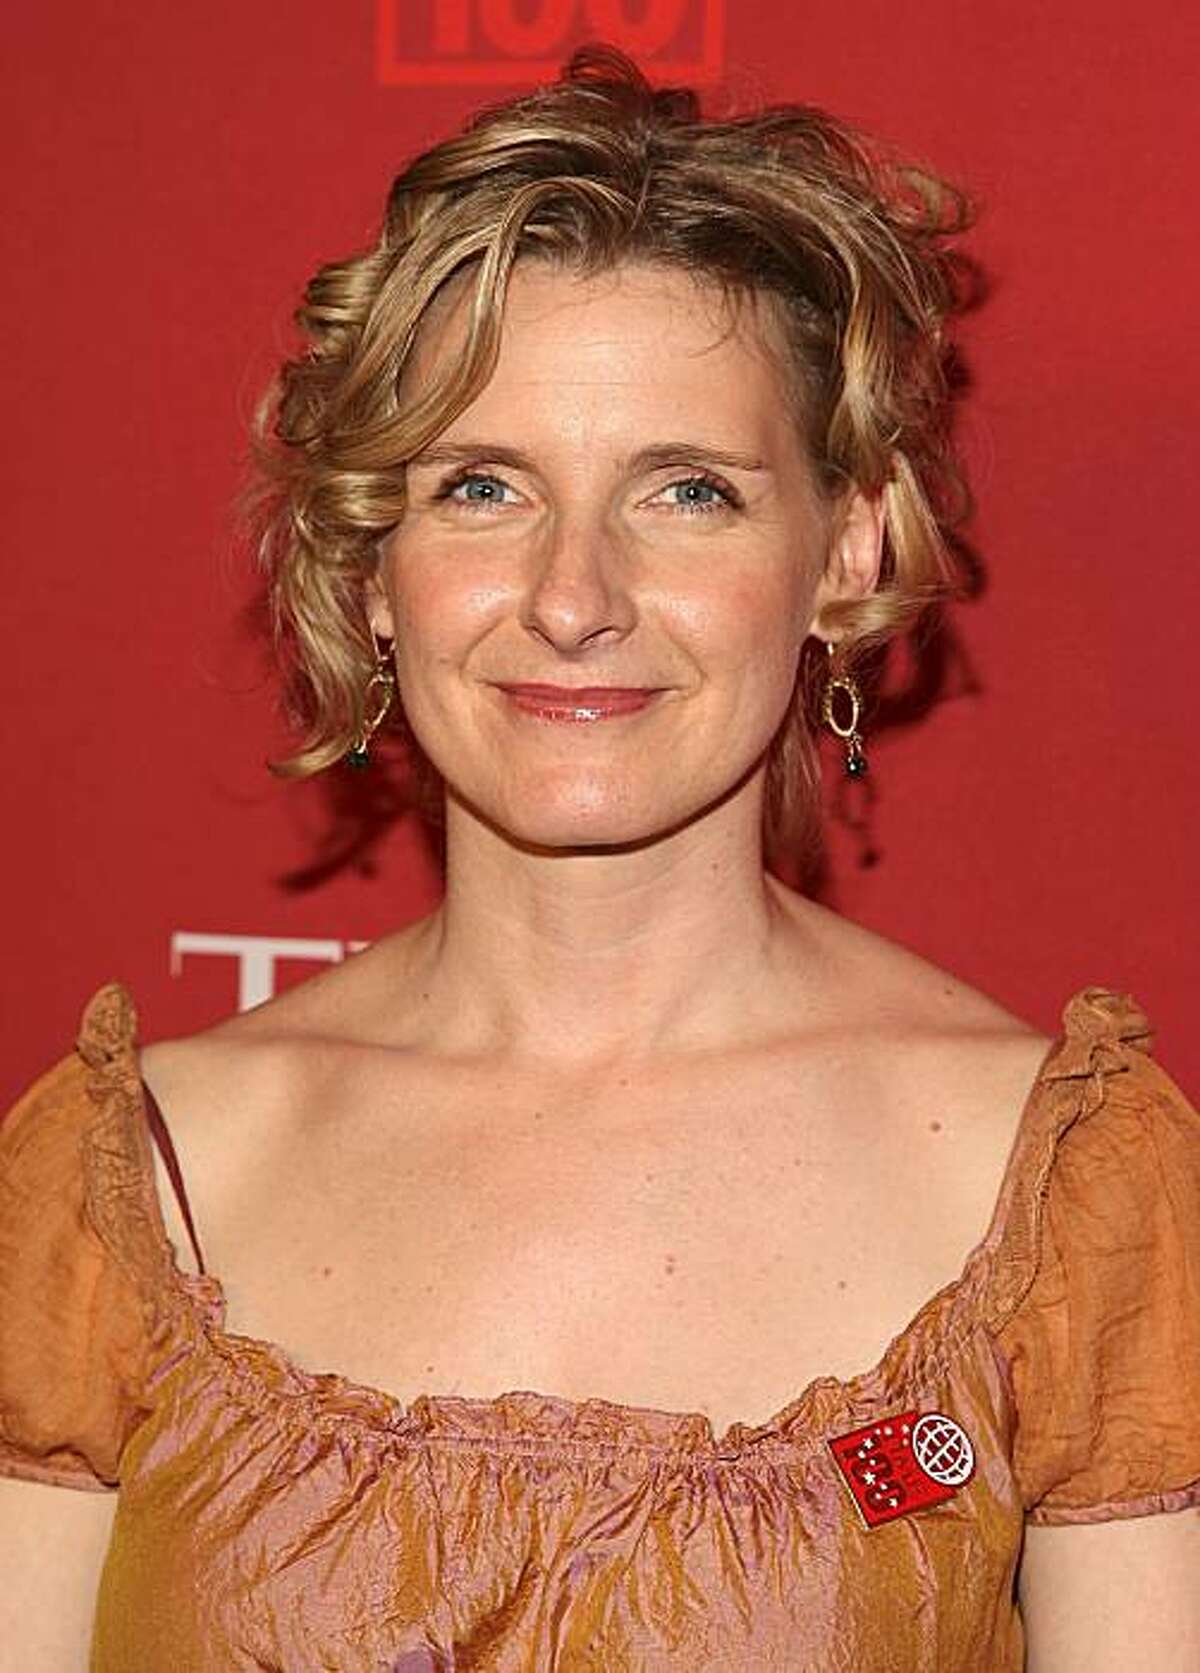 NEW YORK - MAY 08: Author Elizabeth Gilbert arrives at TIME's 100 Most Influential People Gala at Frederick P. Rose Hall on May 08, 2008 in New York City> (Photo by Stephen Lovekin/Getty Images) NEW YORK - MAY 08: Author Elizabeth Gilbert arrives at TIME's 100 Most Influential People Gala at Frederick P. Rose Hall on May 08, 2008 in New York City. (Photo by Stephen Lovekin/Getty Images)